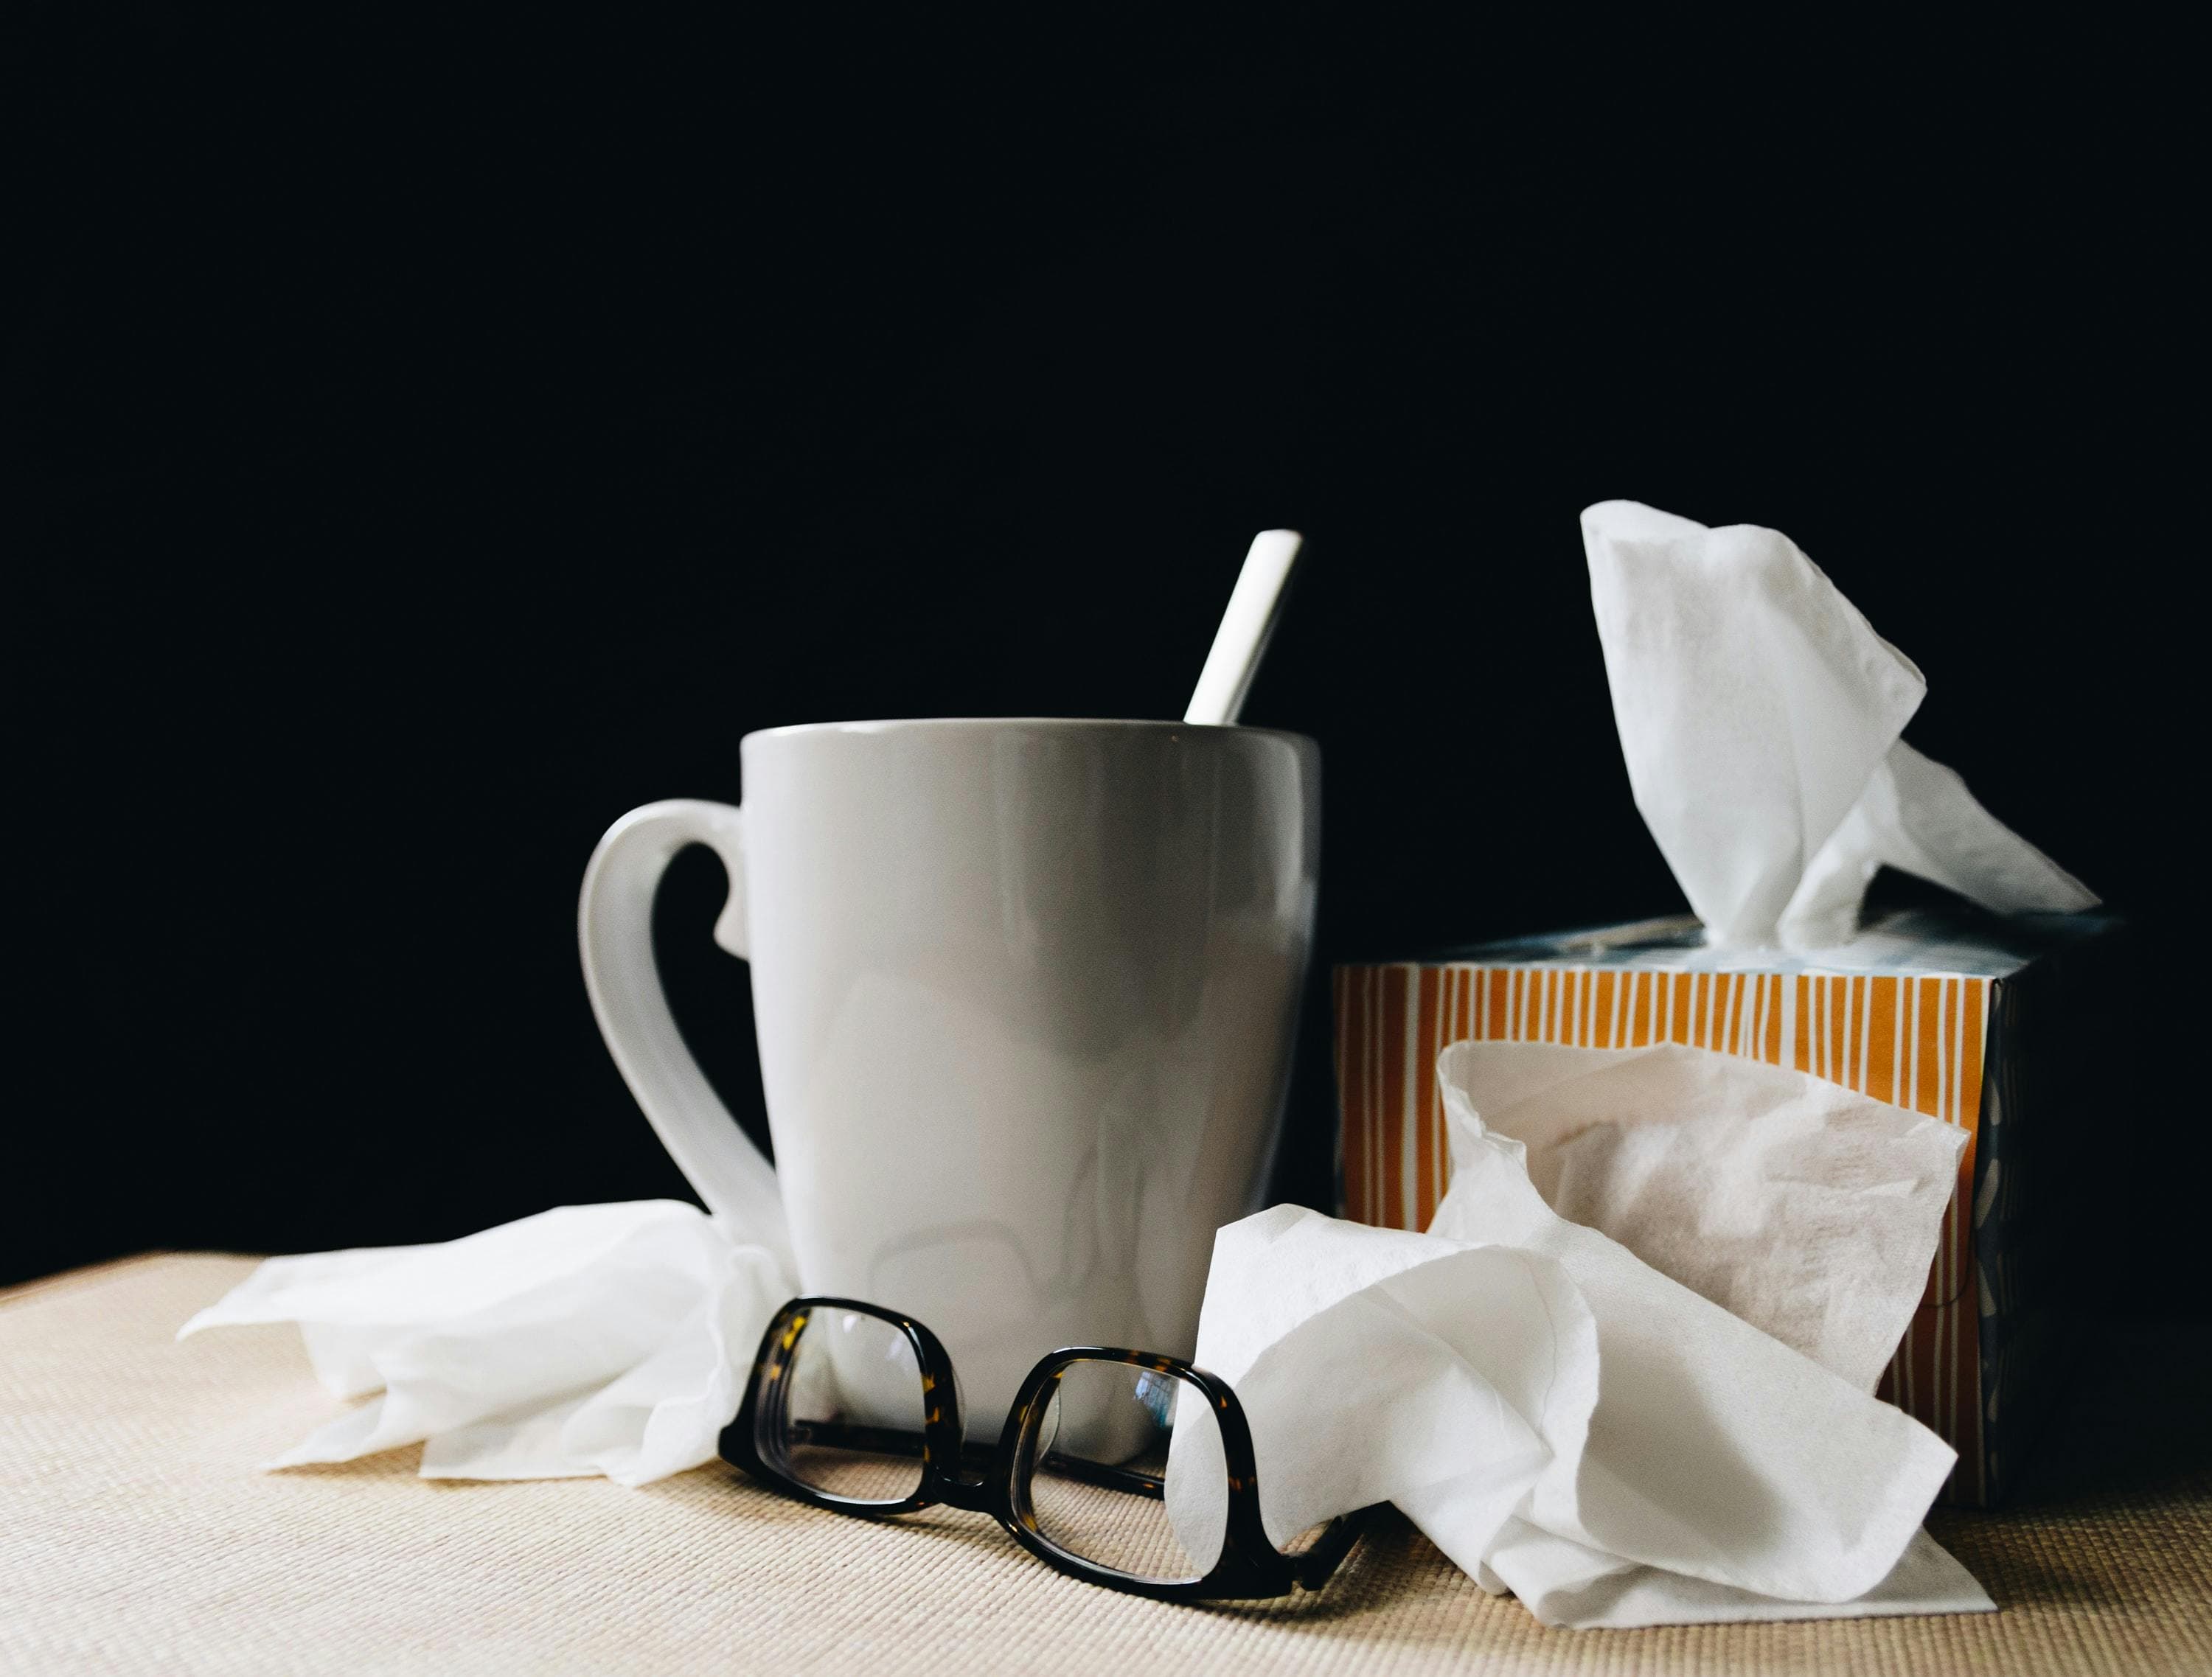 Coffee mug, glasses and tissues on a desk